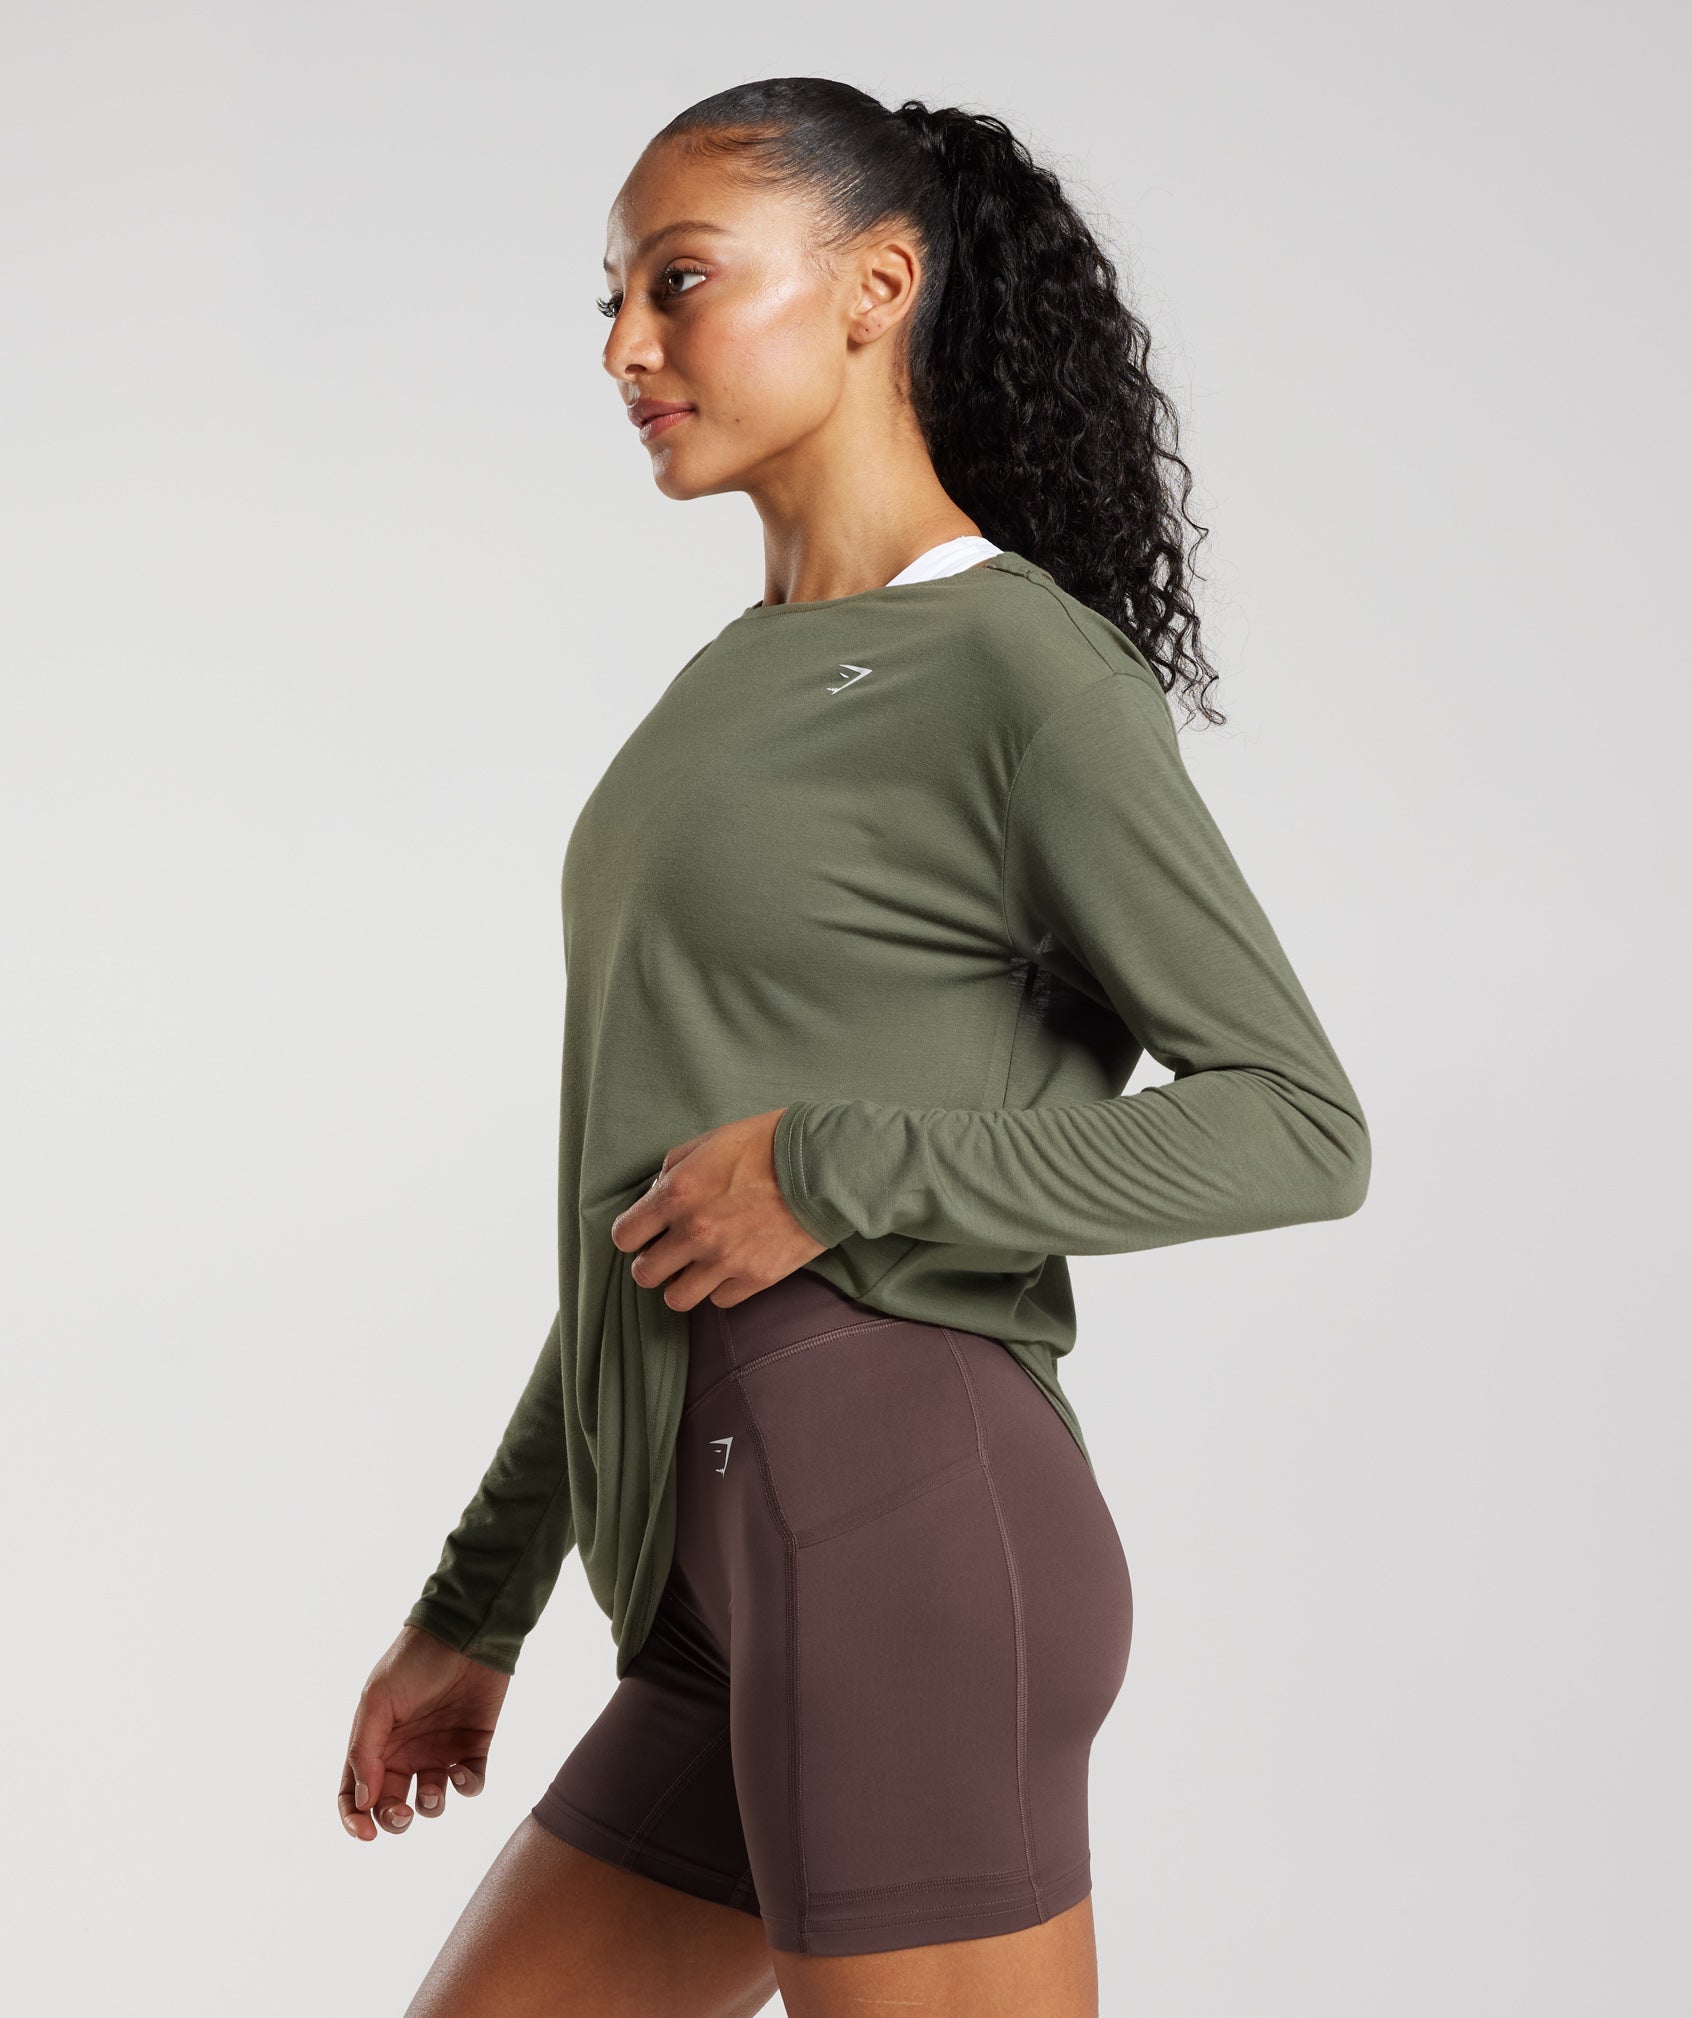 Super Soft Cut-Out Long Sleeve Top in  Dusty Olive